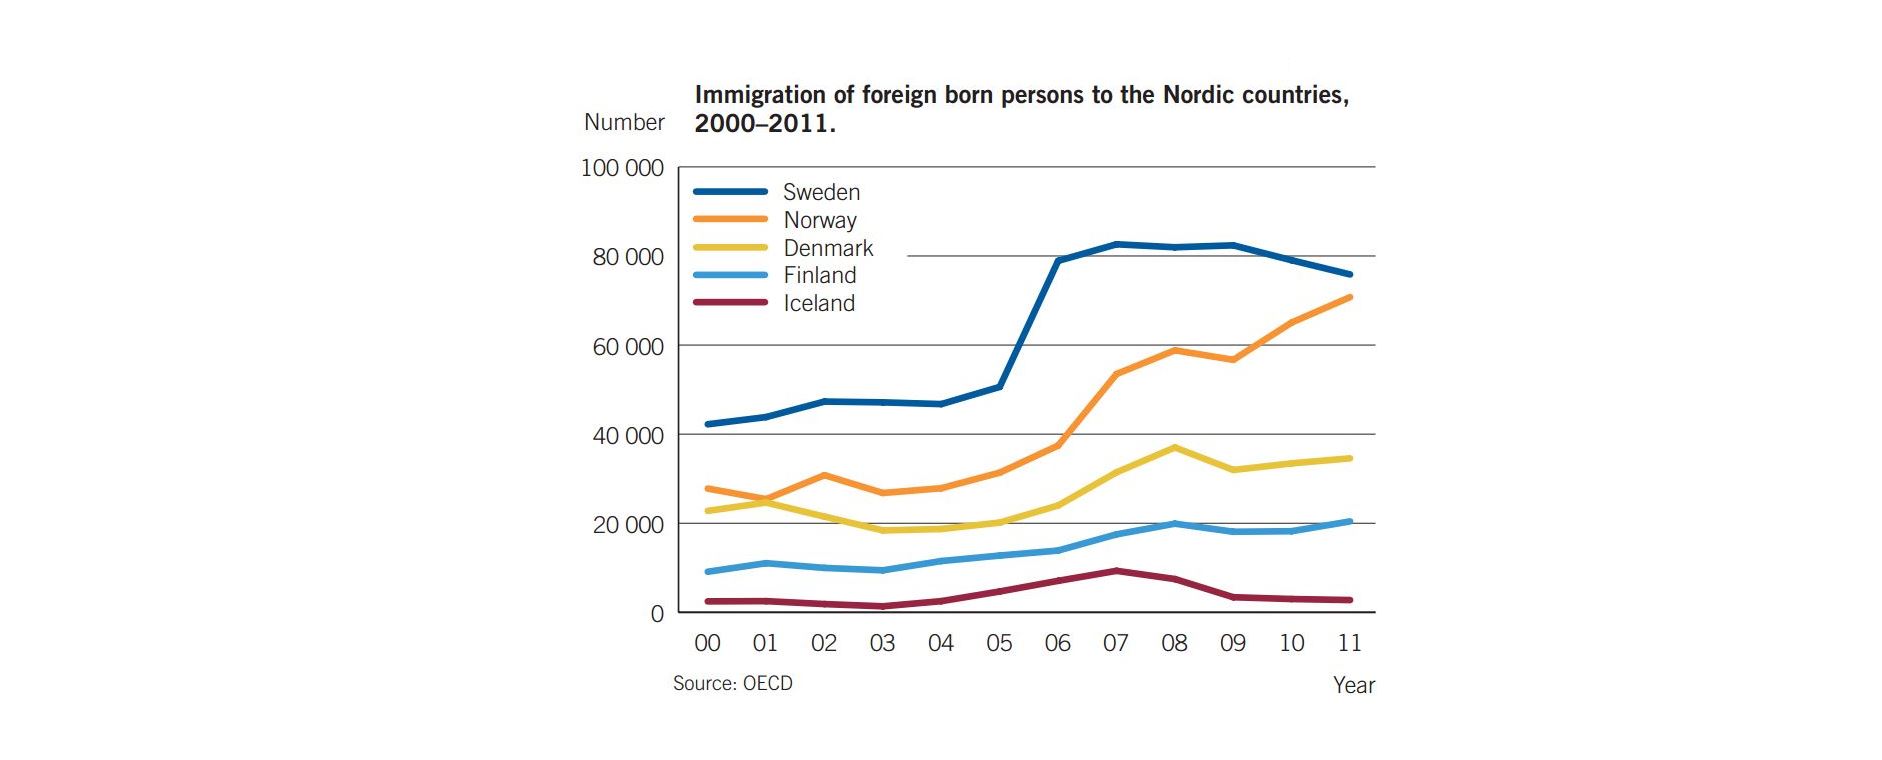 Jobs are key to all Nordic countries’ integration policies